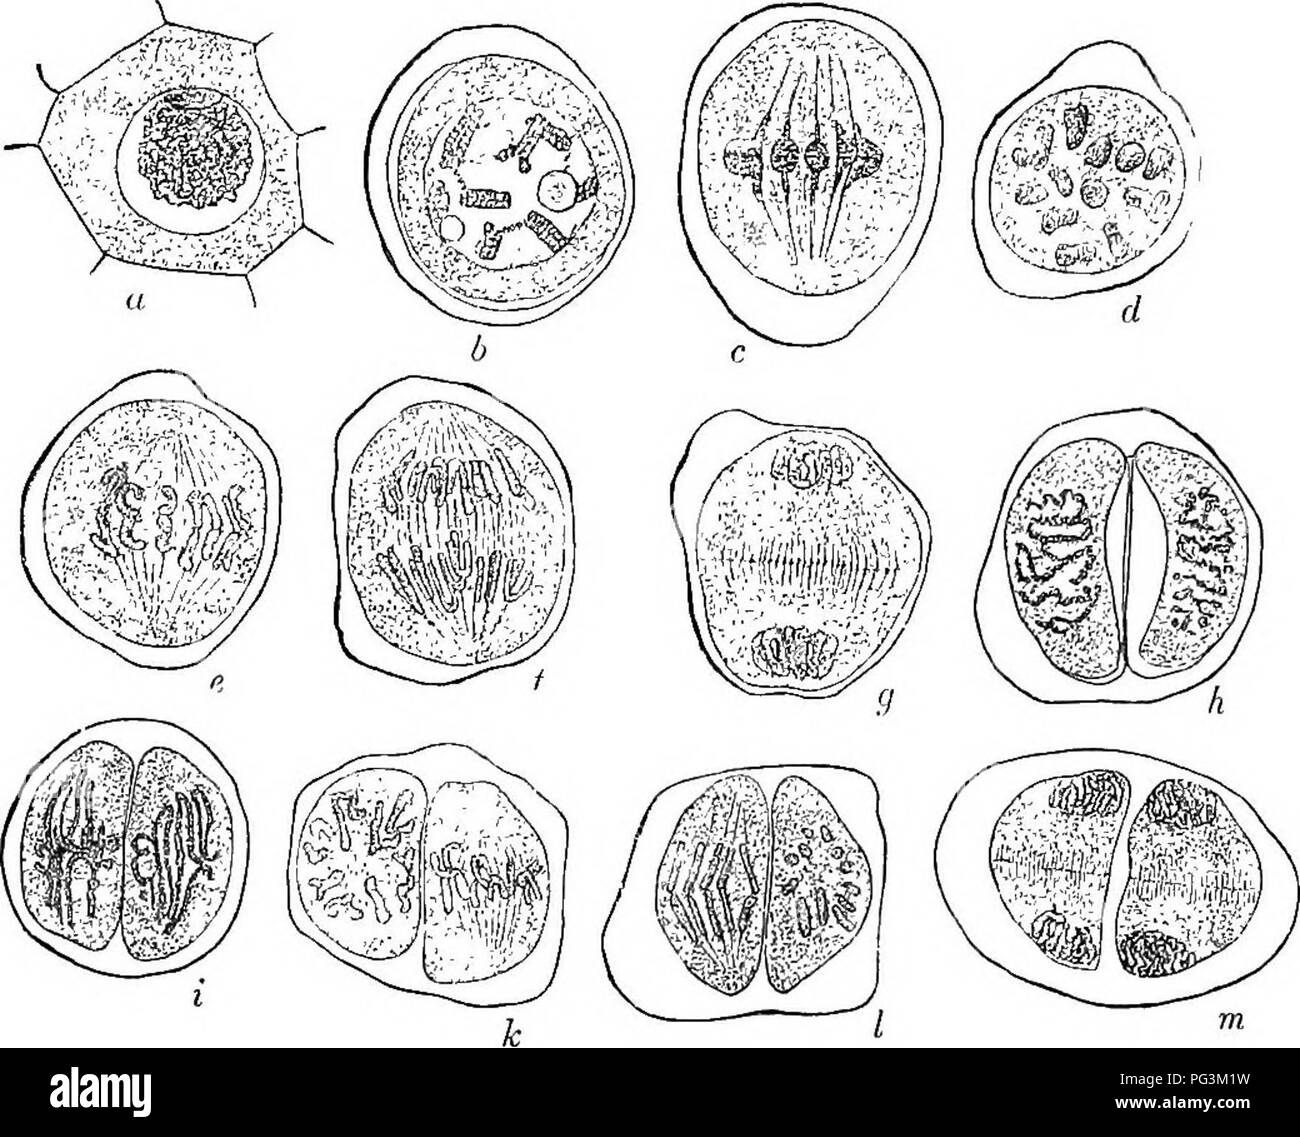 . Physiological botany; I. Outlines of the histology of phænogamous plants. II. Vegetable physiology. Plant physiology; Plant anatomy. DEVELOPMENT OF POLLEN-GRAINS. 379 1000. Development of pollen-grains. This affords some of the most instructive eKainples of cell-division, and owing to the facility with which material can be procured and studied, has received much attention. (1) Sirperficiul phenomena. These, which can be easily traced without the eraplo3'ment of staining agents, are in brief as follows : At the period when the loculi of the anthers begin as minute elevations at the end of th Stock Photo